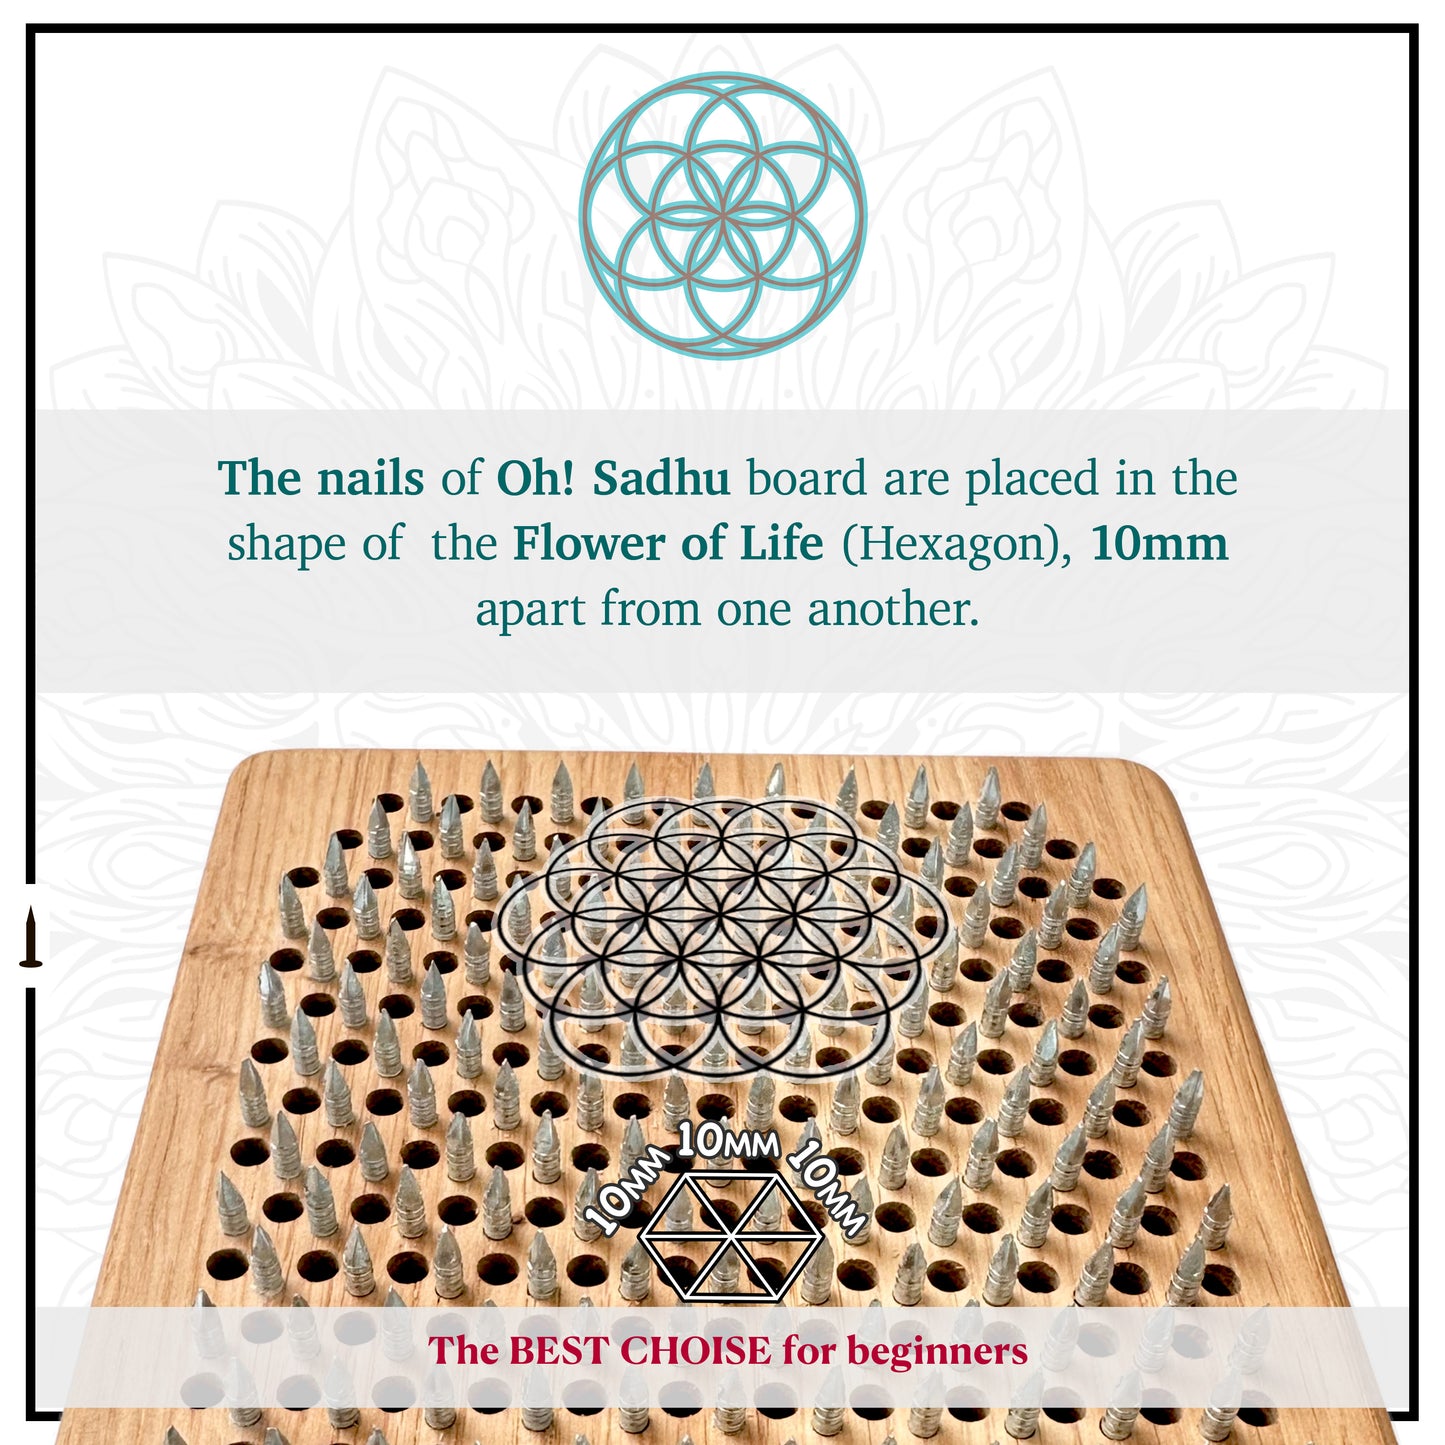 nails step 10mm in shape of flower of life on wooden board